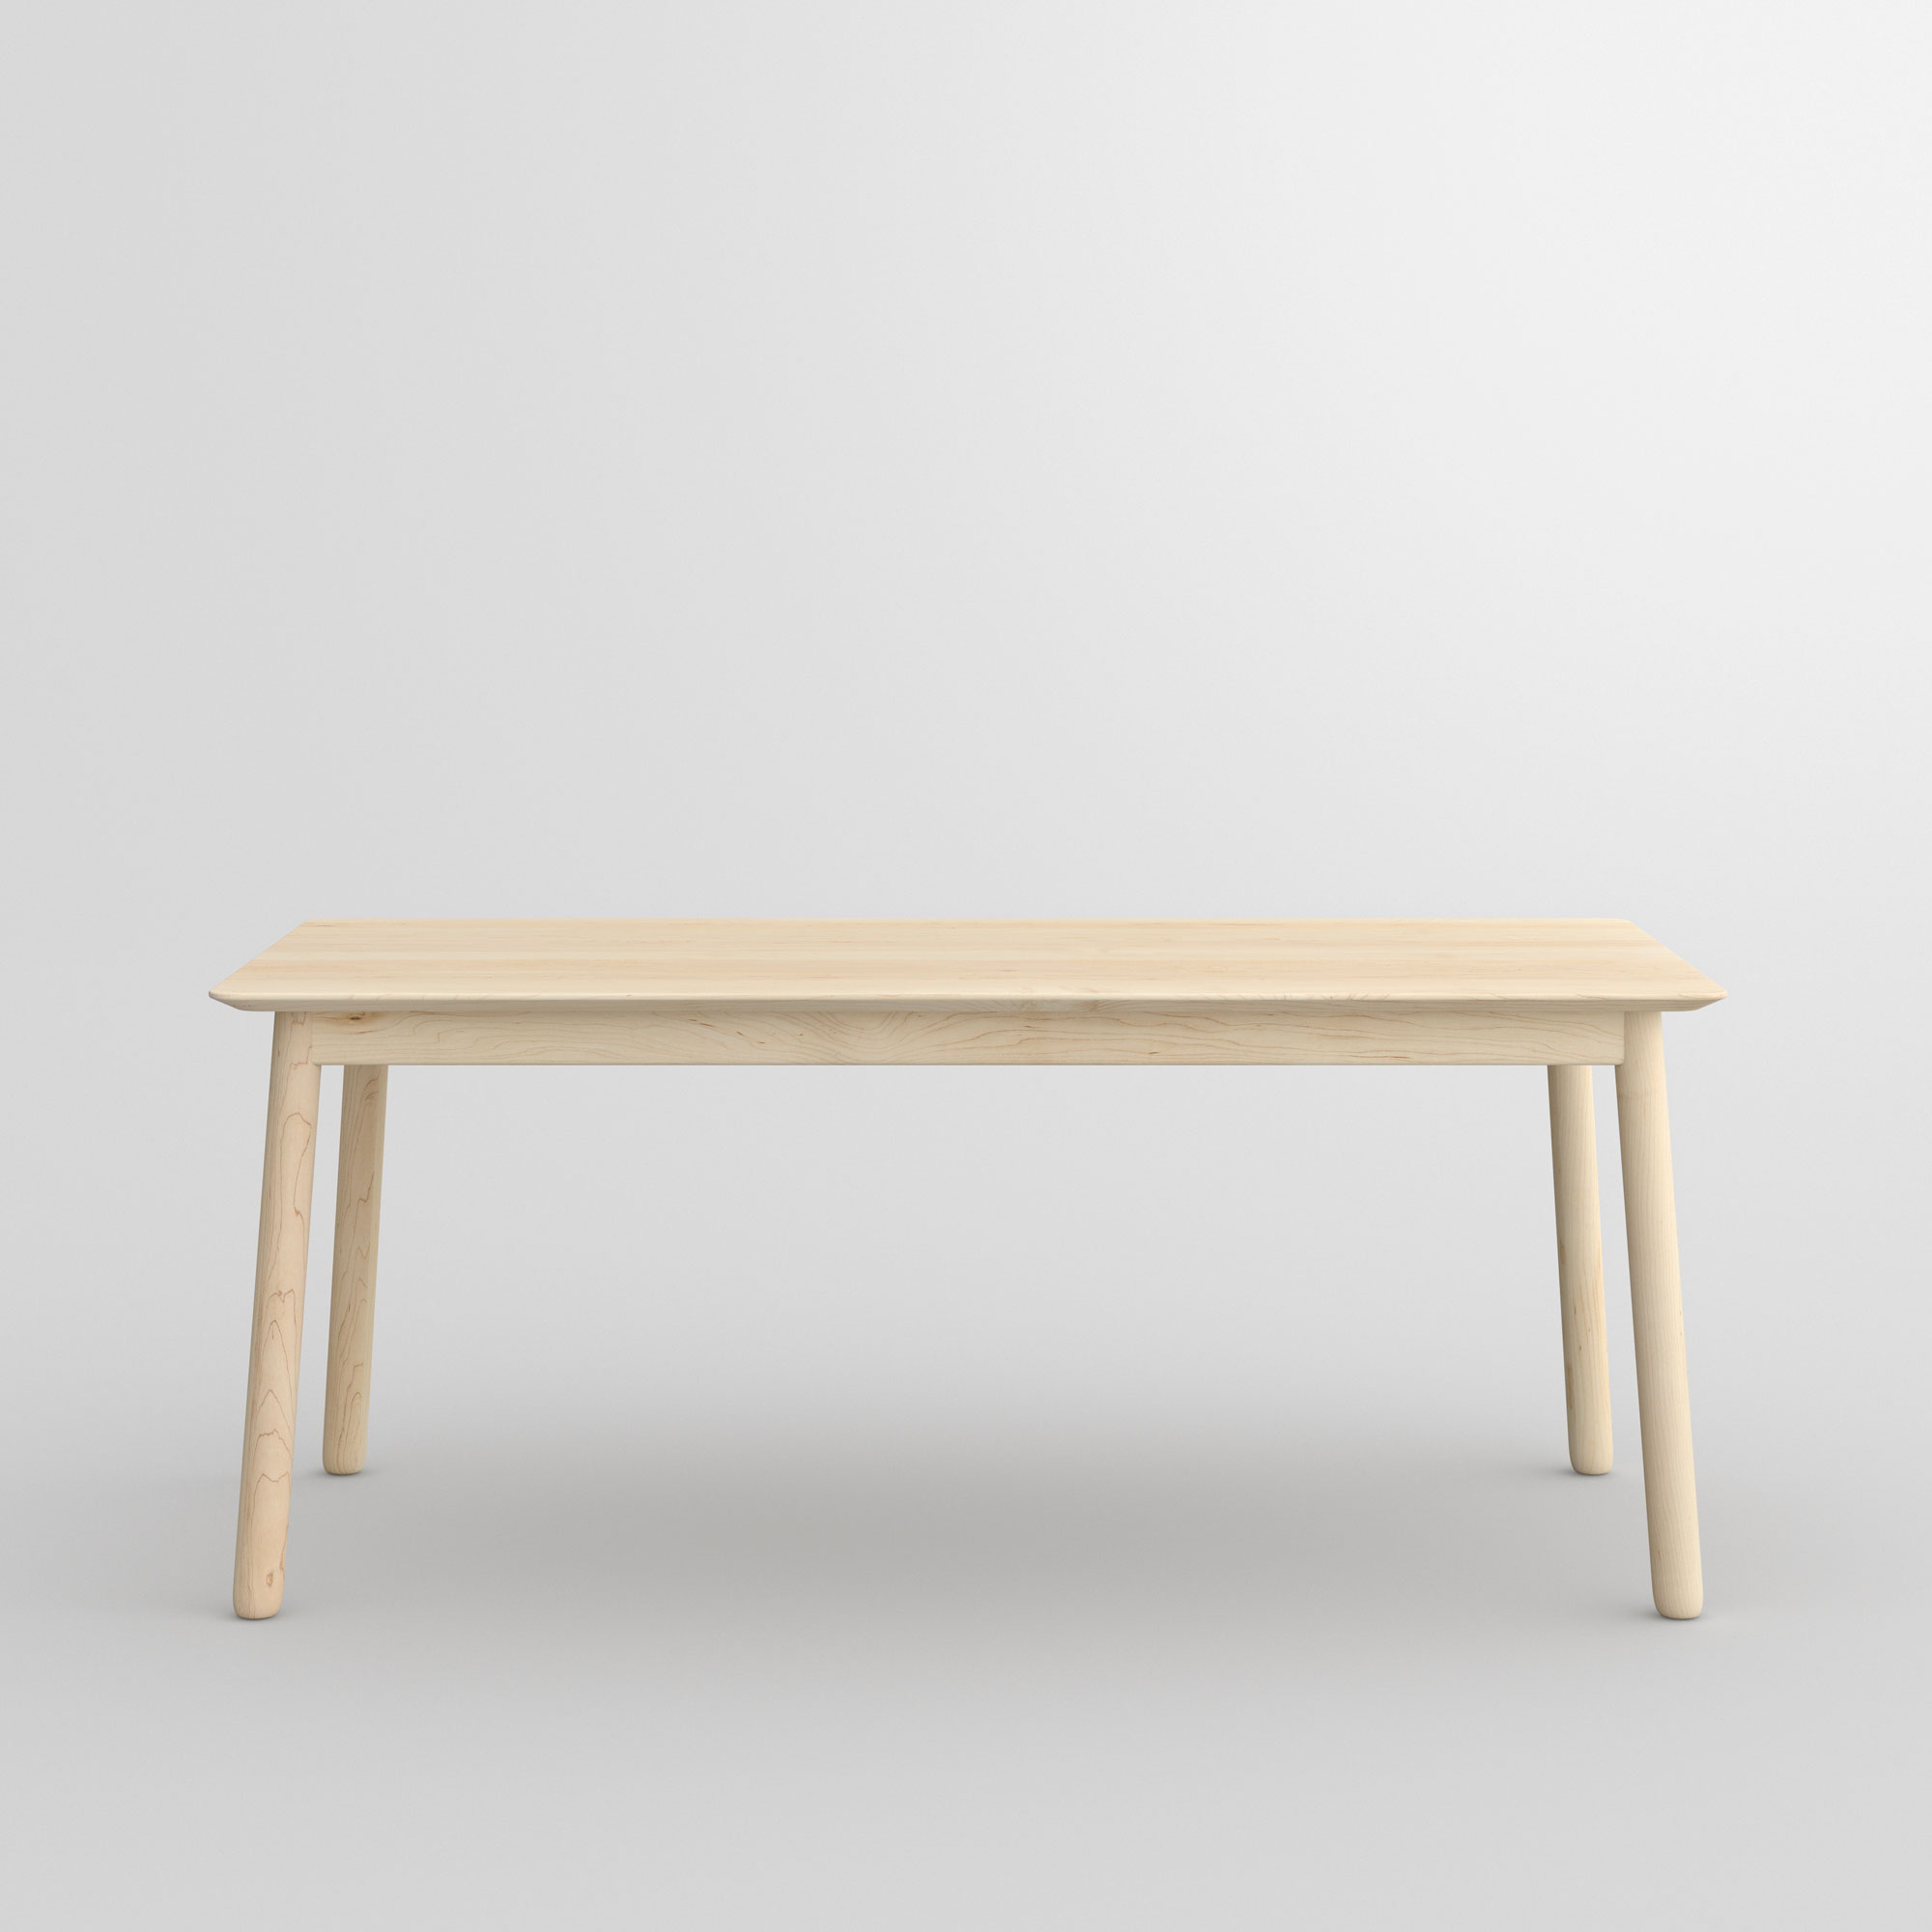 Style Wood Table LOCA cam2 custom made in solid wood by vitamin design